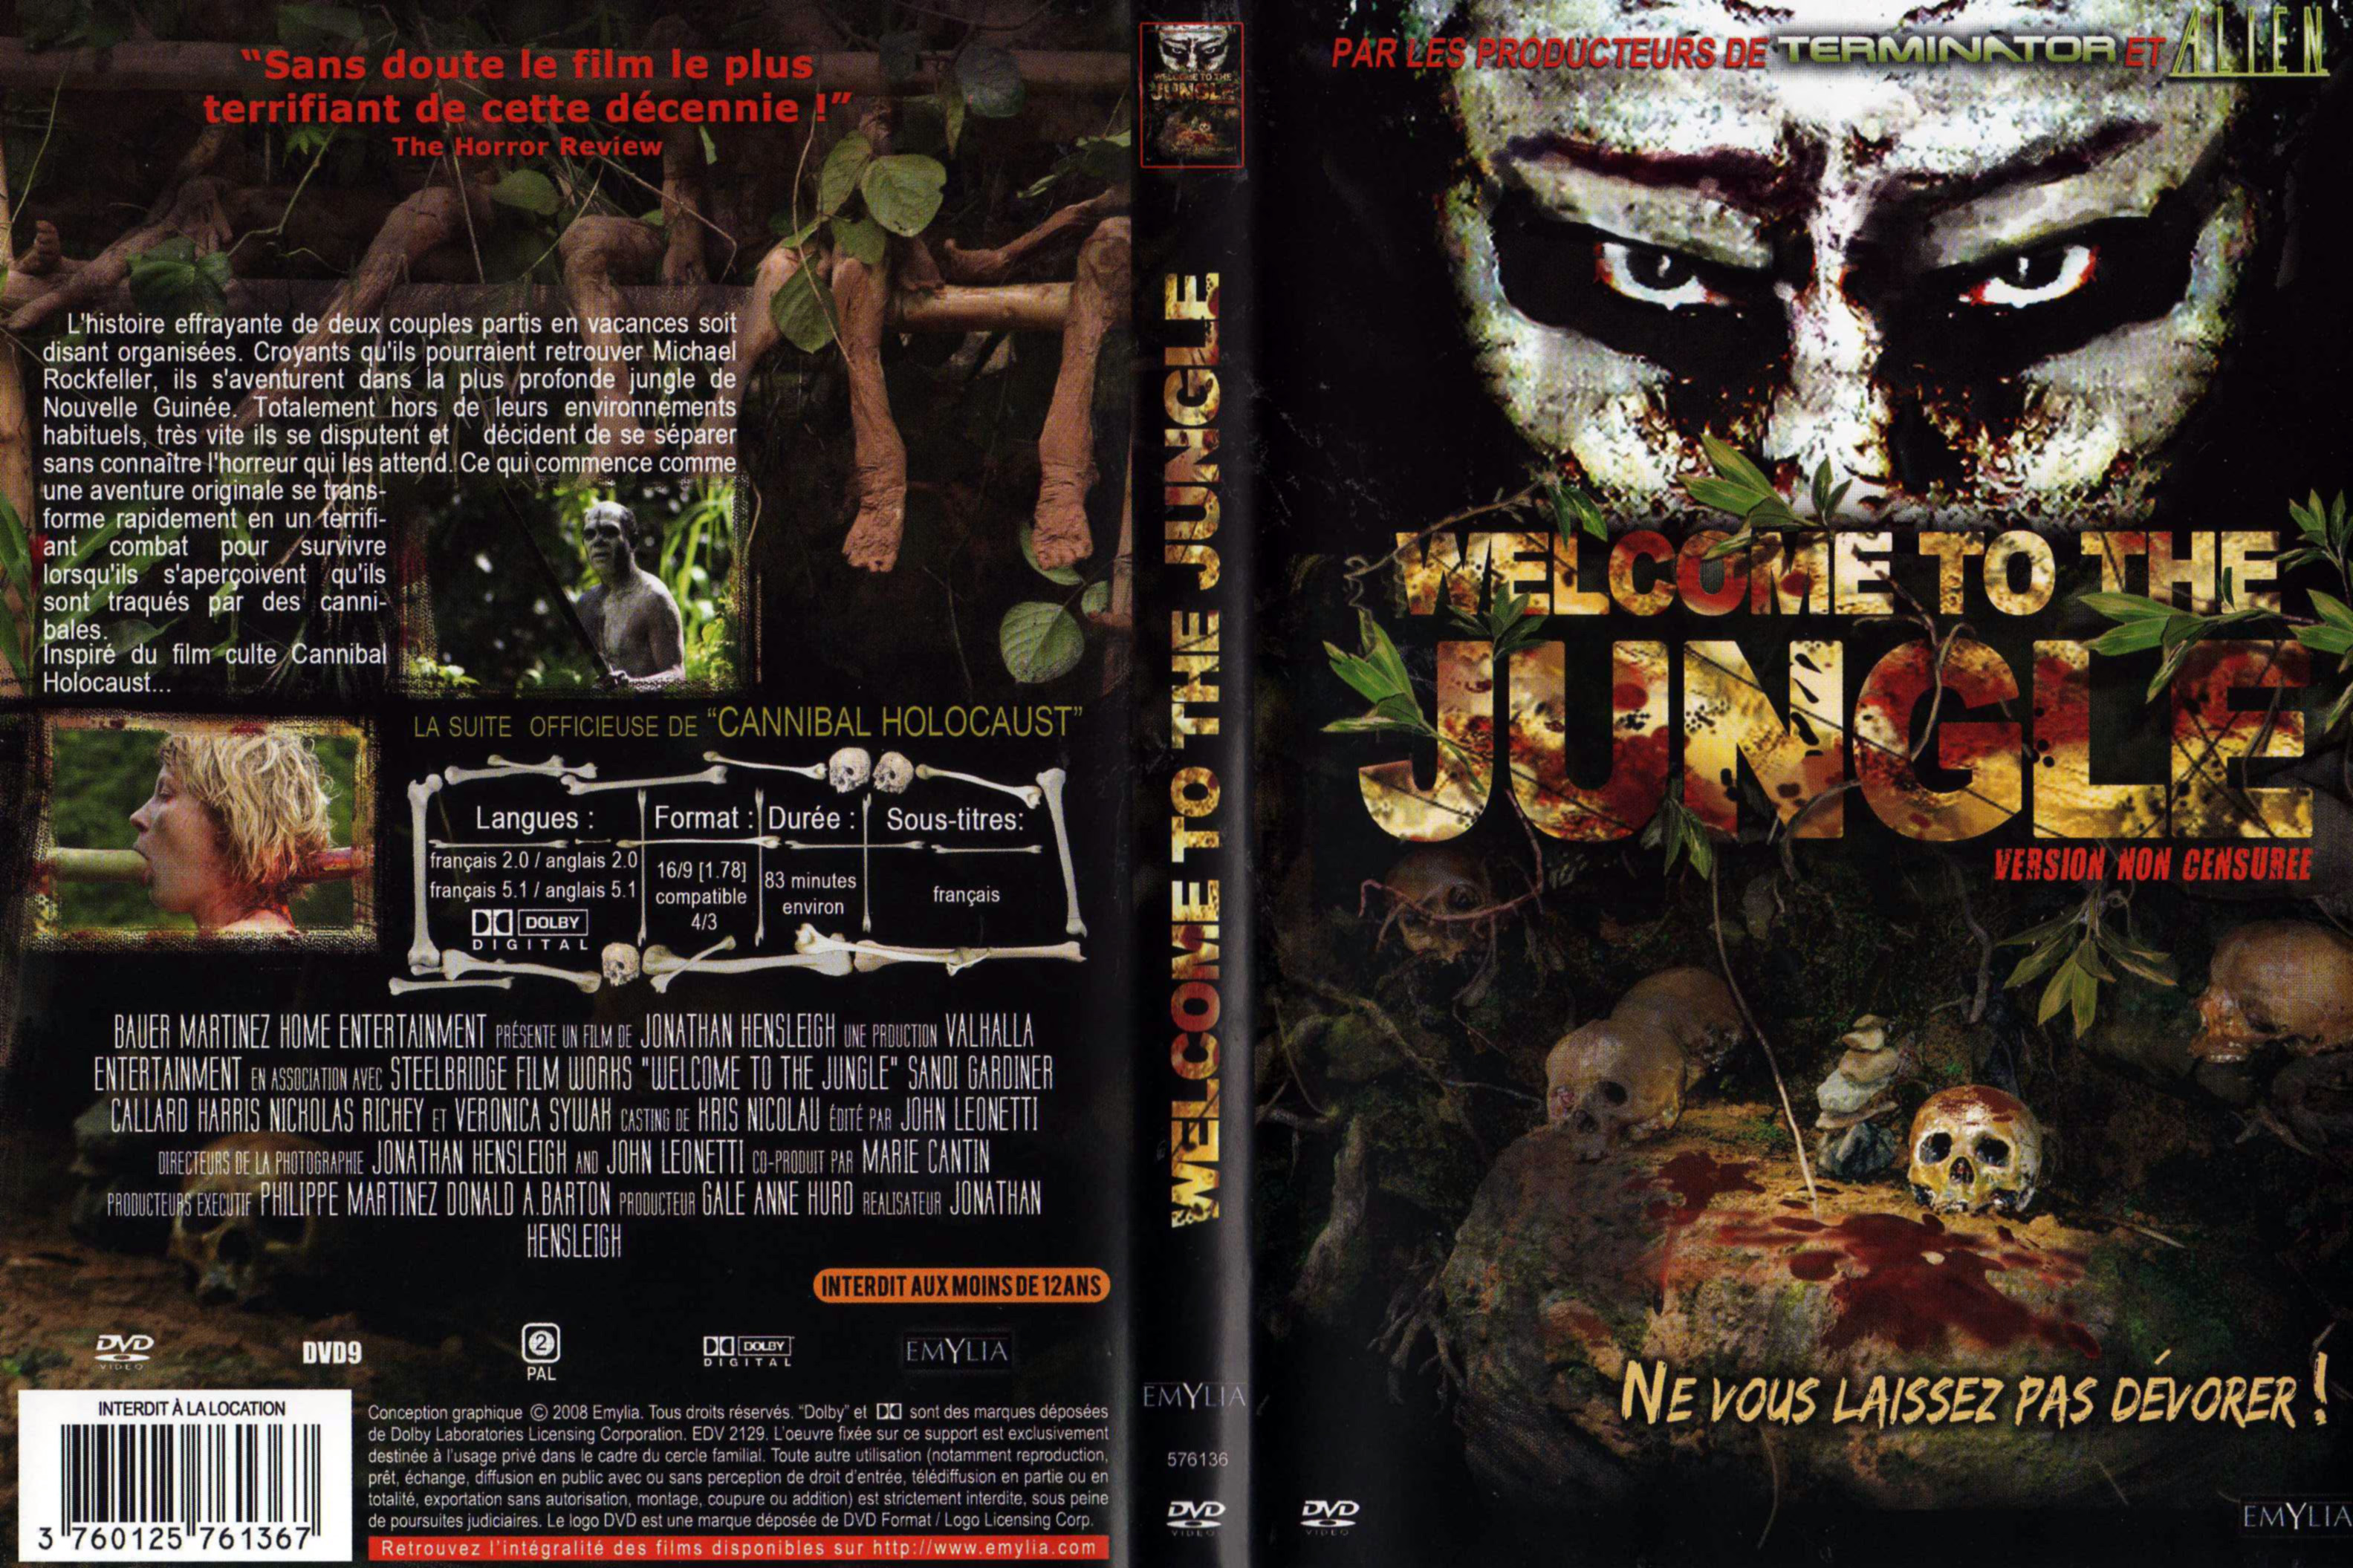 Jaquette DVD Welcome to the jungle